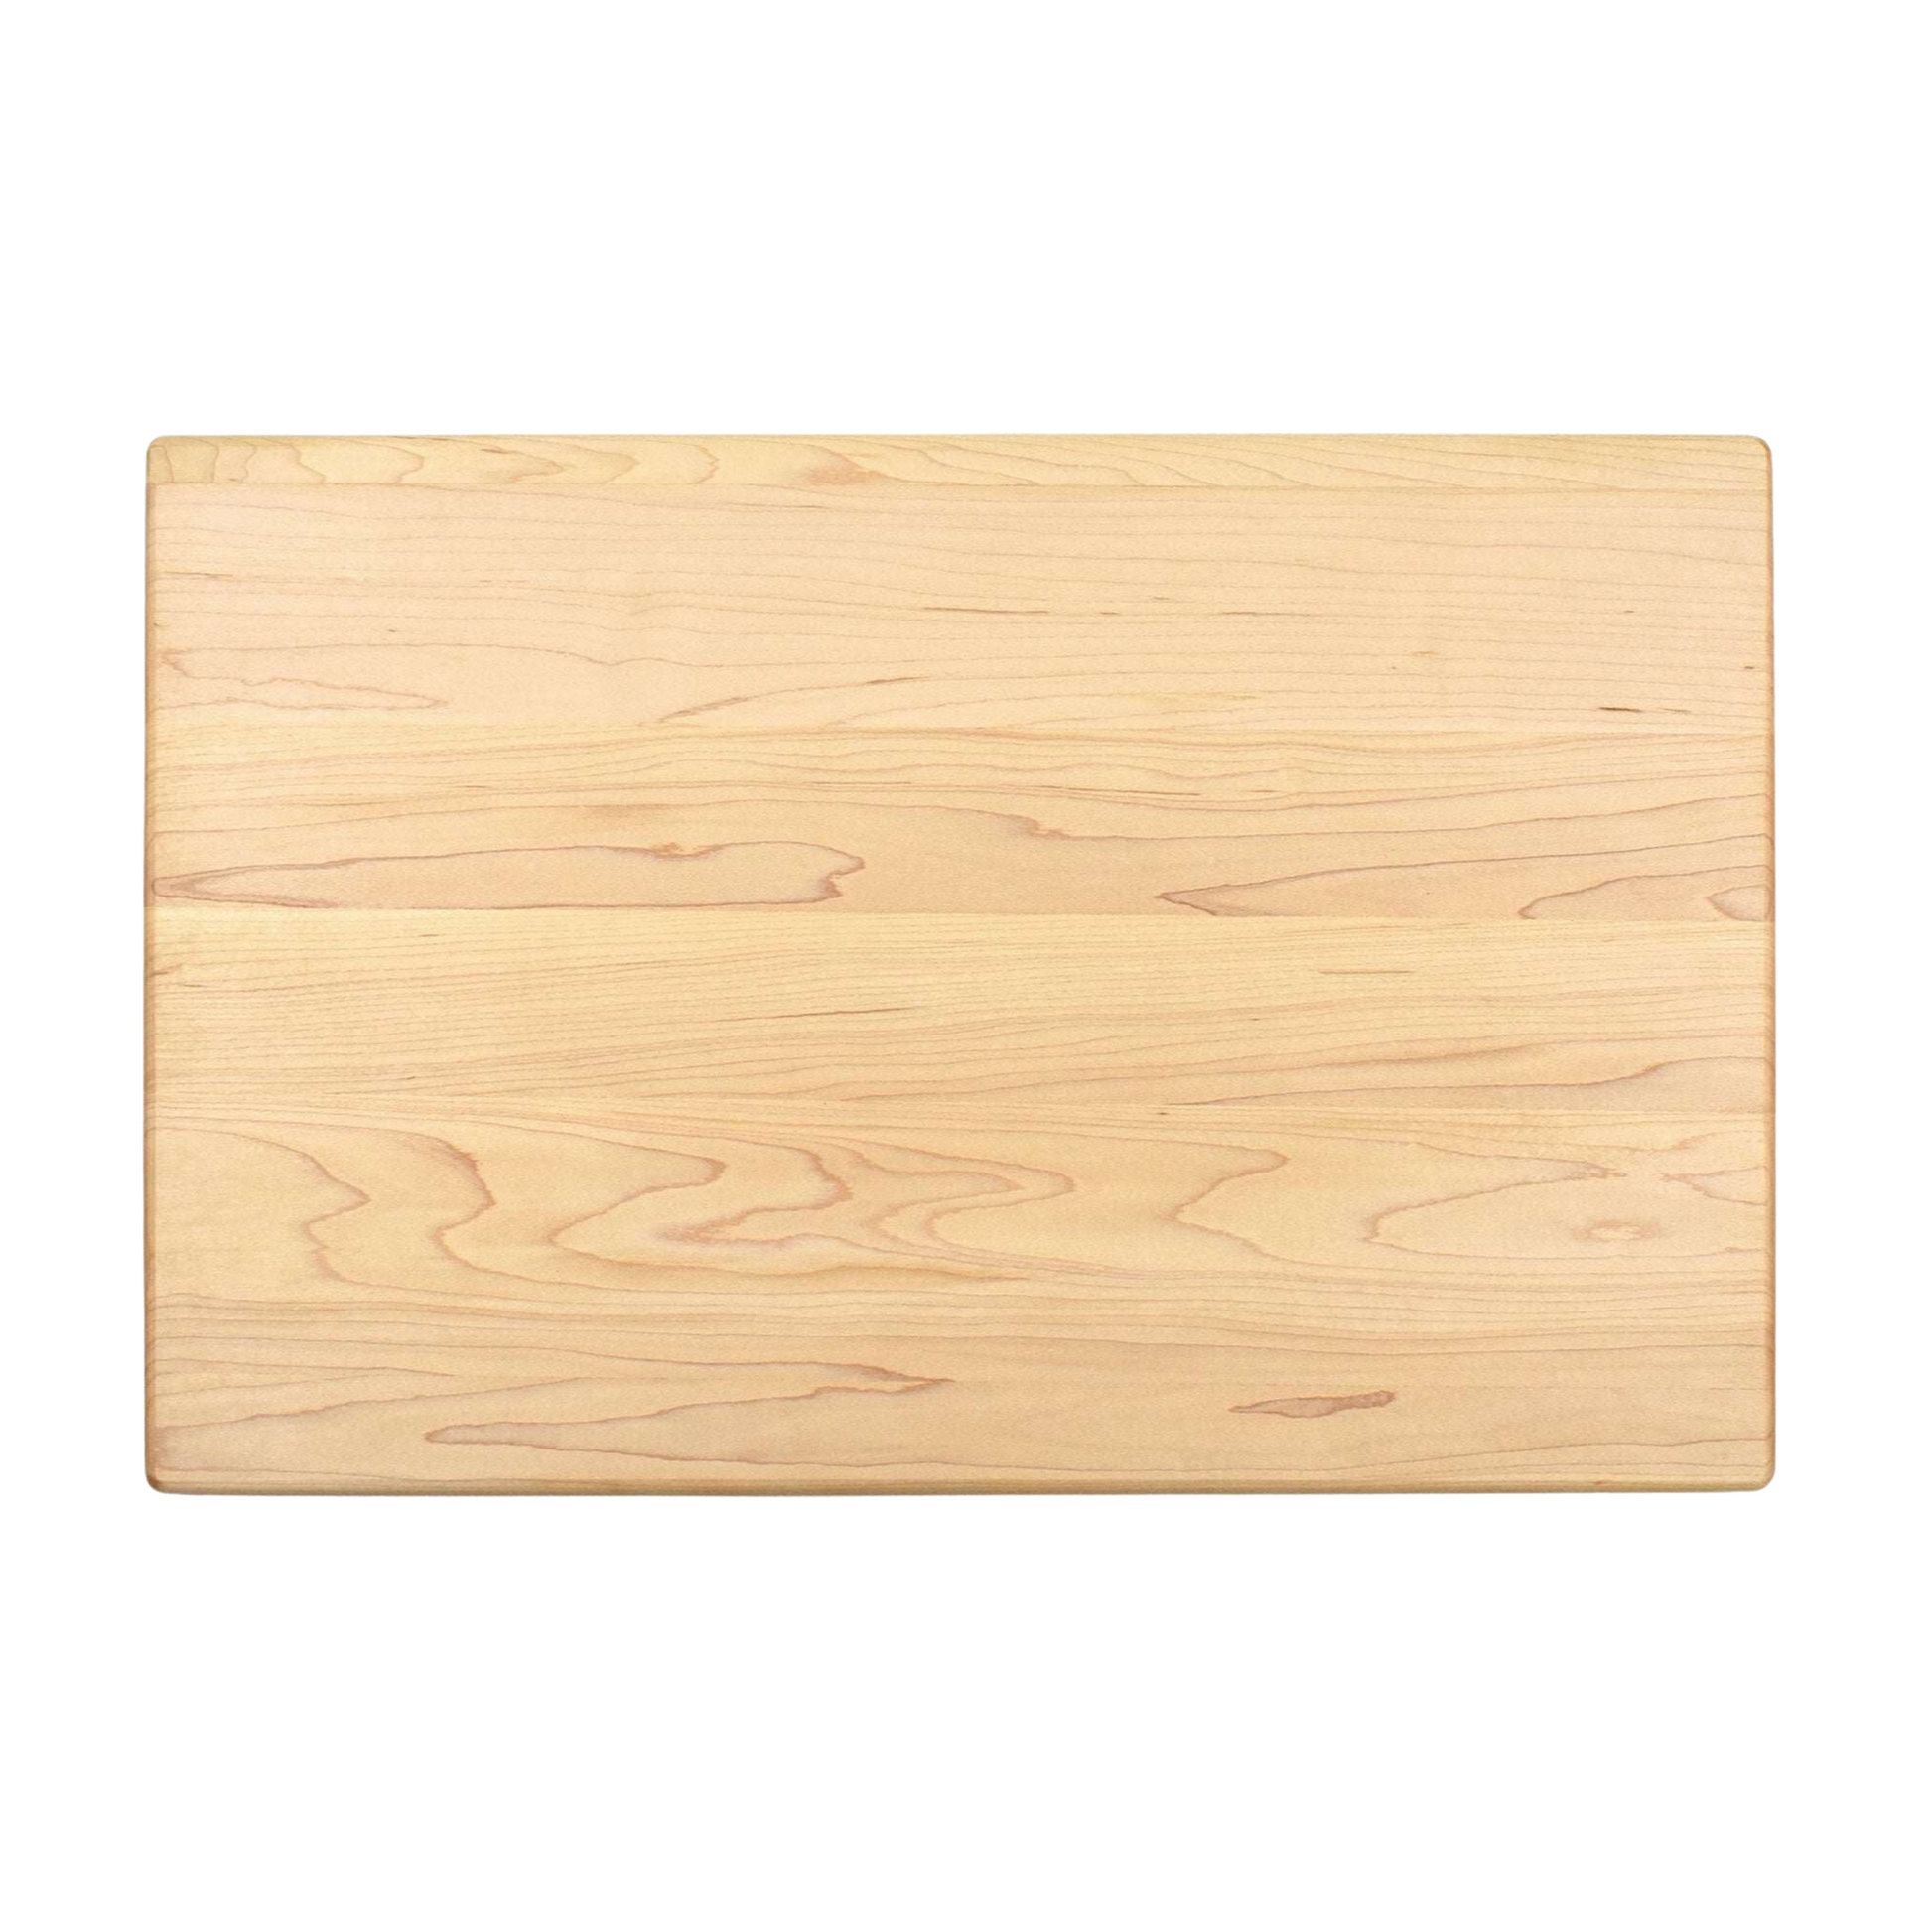 Chop It Like It's Hot Cutting Board - Premium Cutting Boards from Hipster Lasers - Just $90! Shop now at Hipsterlasers